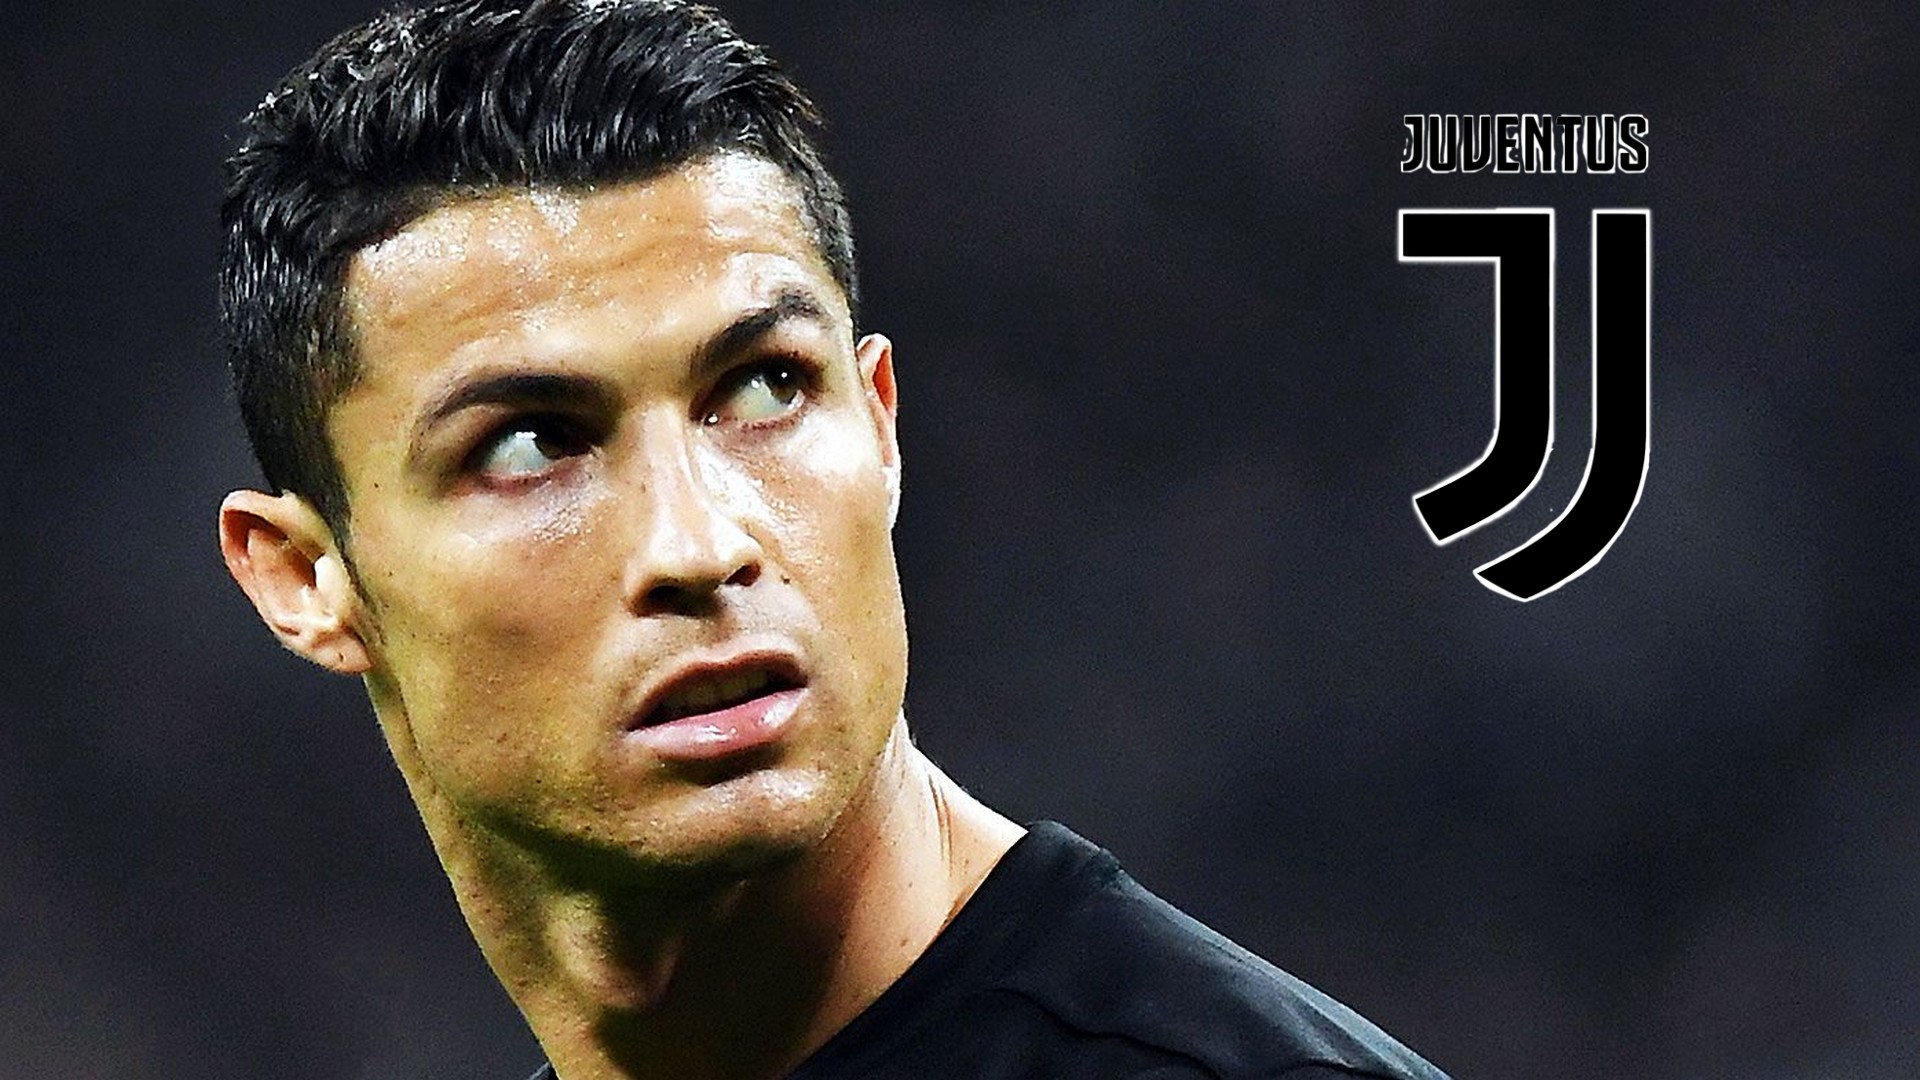 Ronaldo 7 Juventus Wallpaper with resolution 1920x1080 pixel. You can make this wallpaper for your Mac or Windows Desktop Background, iPhone, Android or Tablet and another Smartphone device